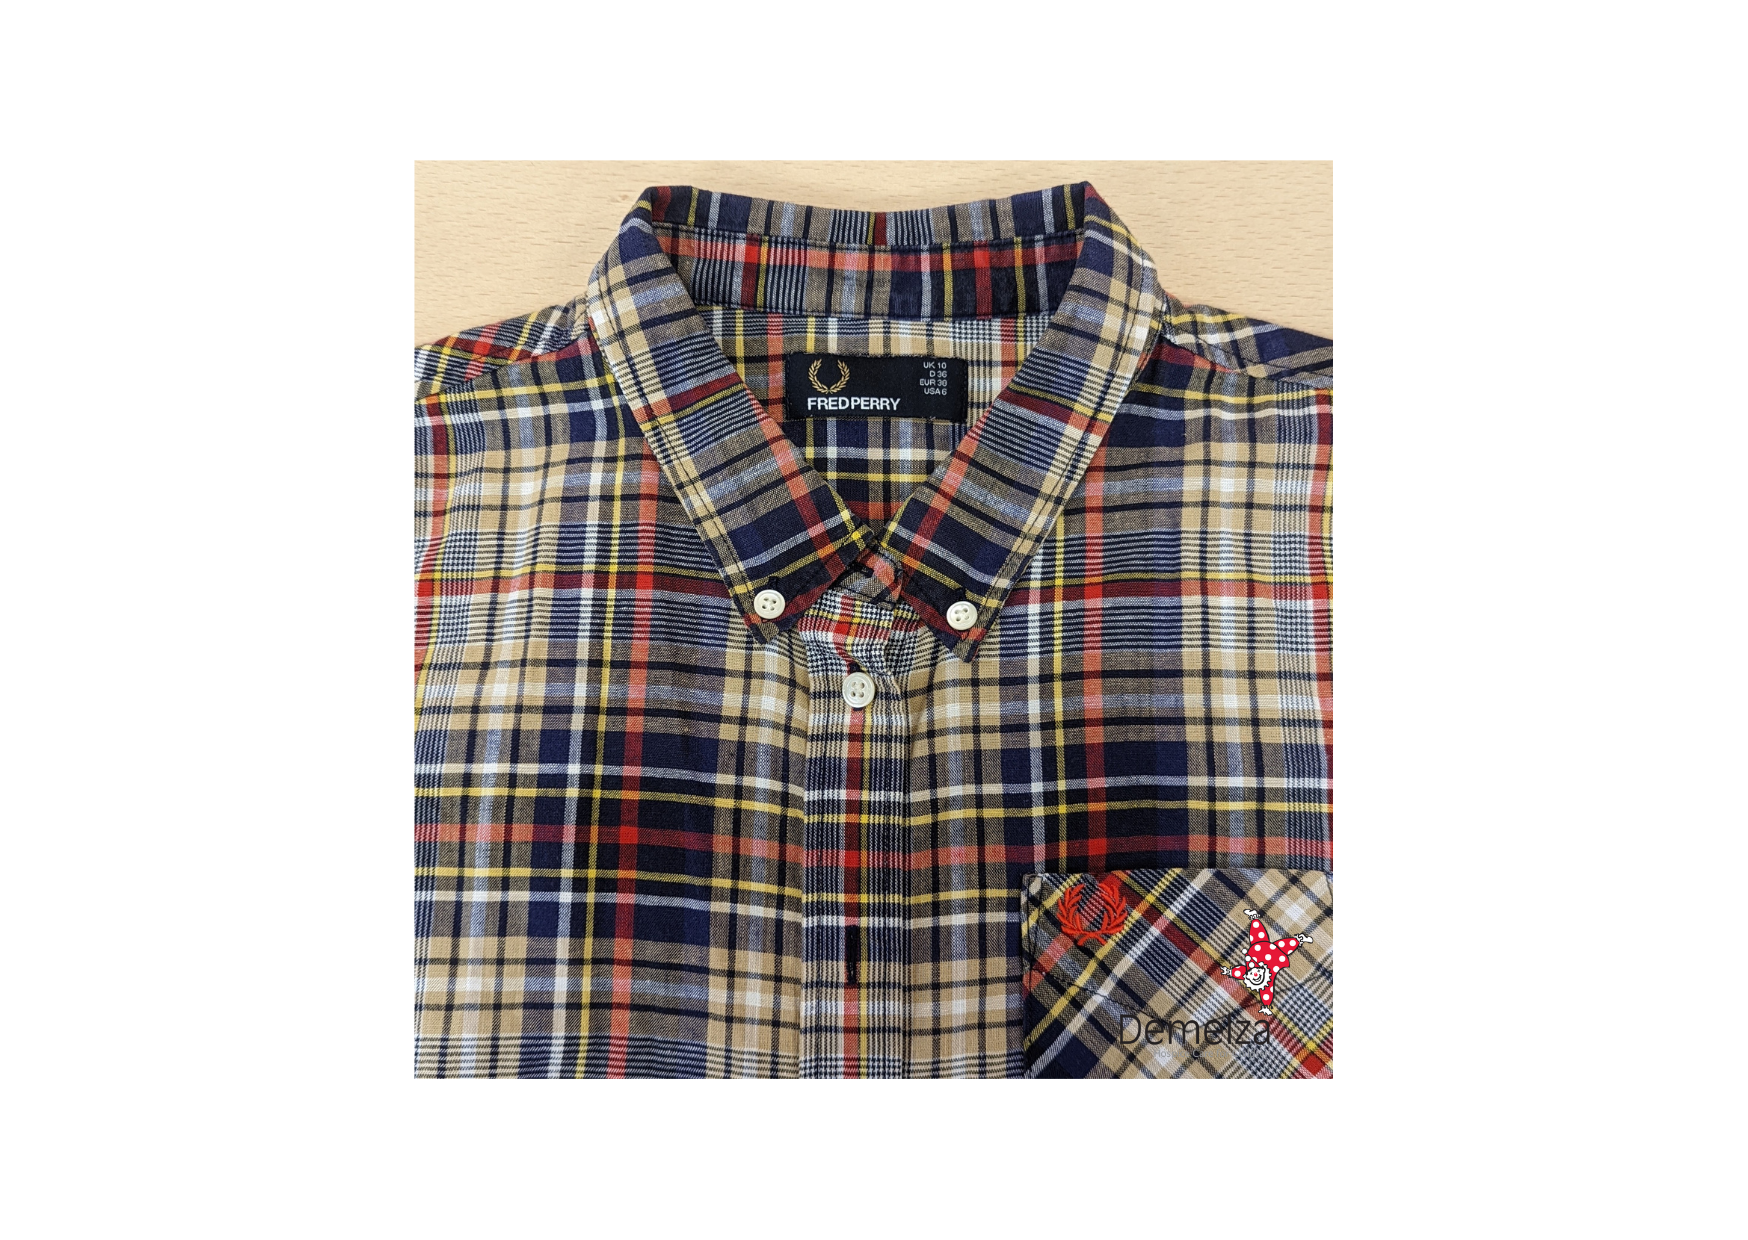 Short sleeved semi fitted shirt in small blue, red and green check